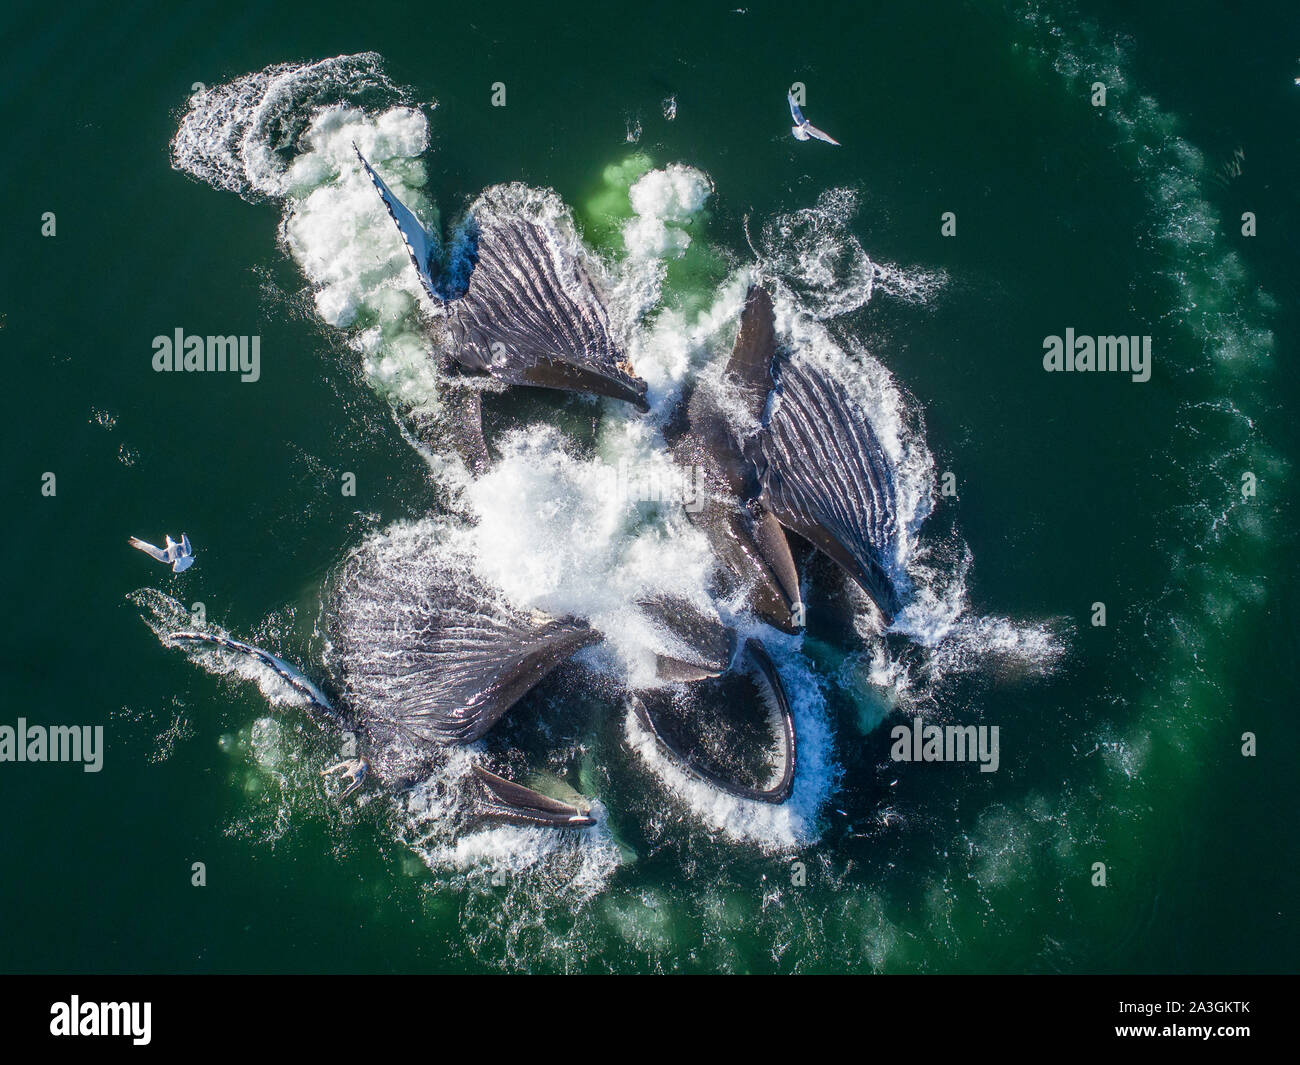 USA, Alaska, Aerial view of Humpback Whales (Megaptera novaeangliae) lunging at surface of Frederick Sound while bubble net feeding on herring shoal o Stock Photo